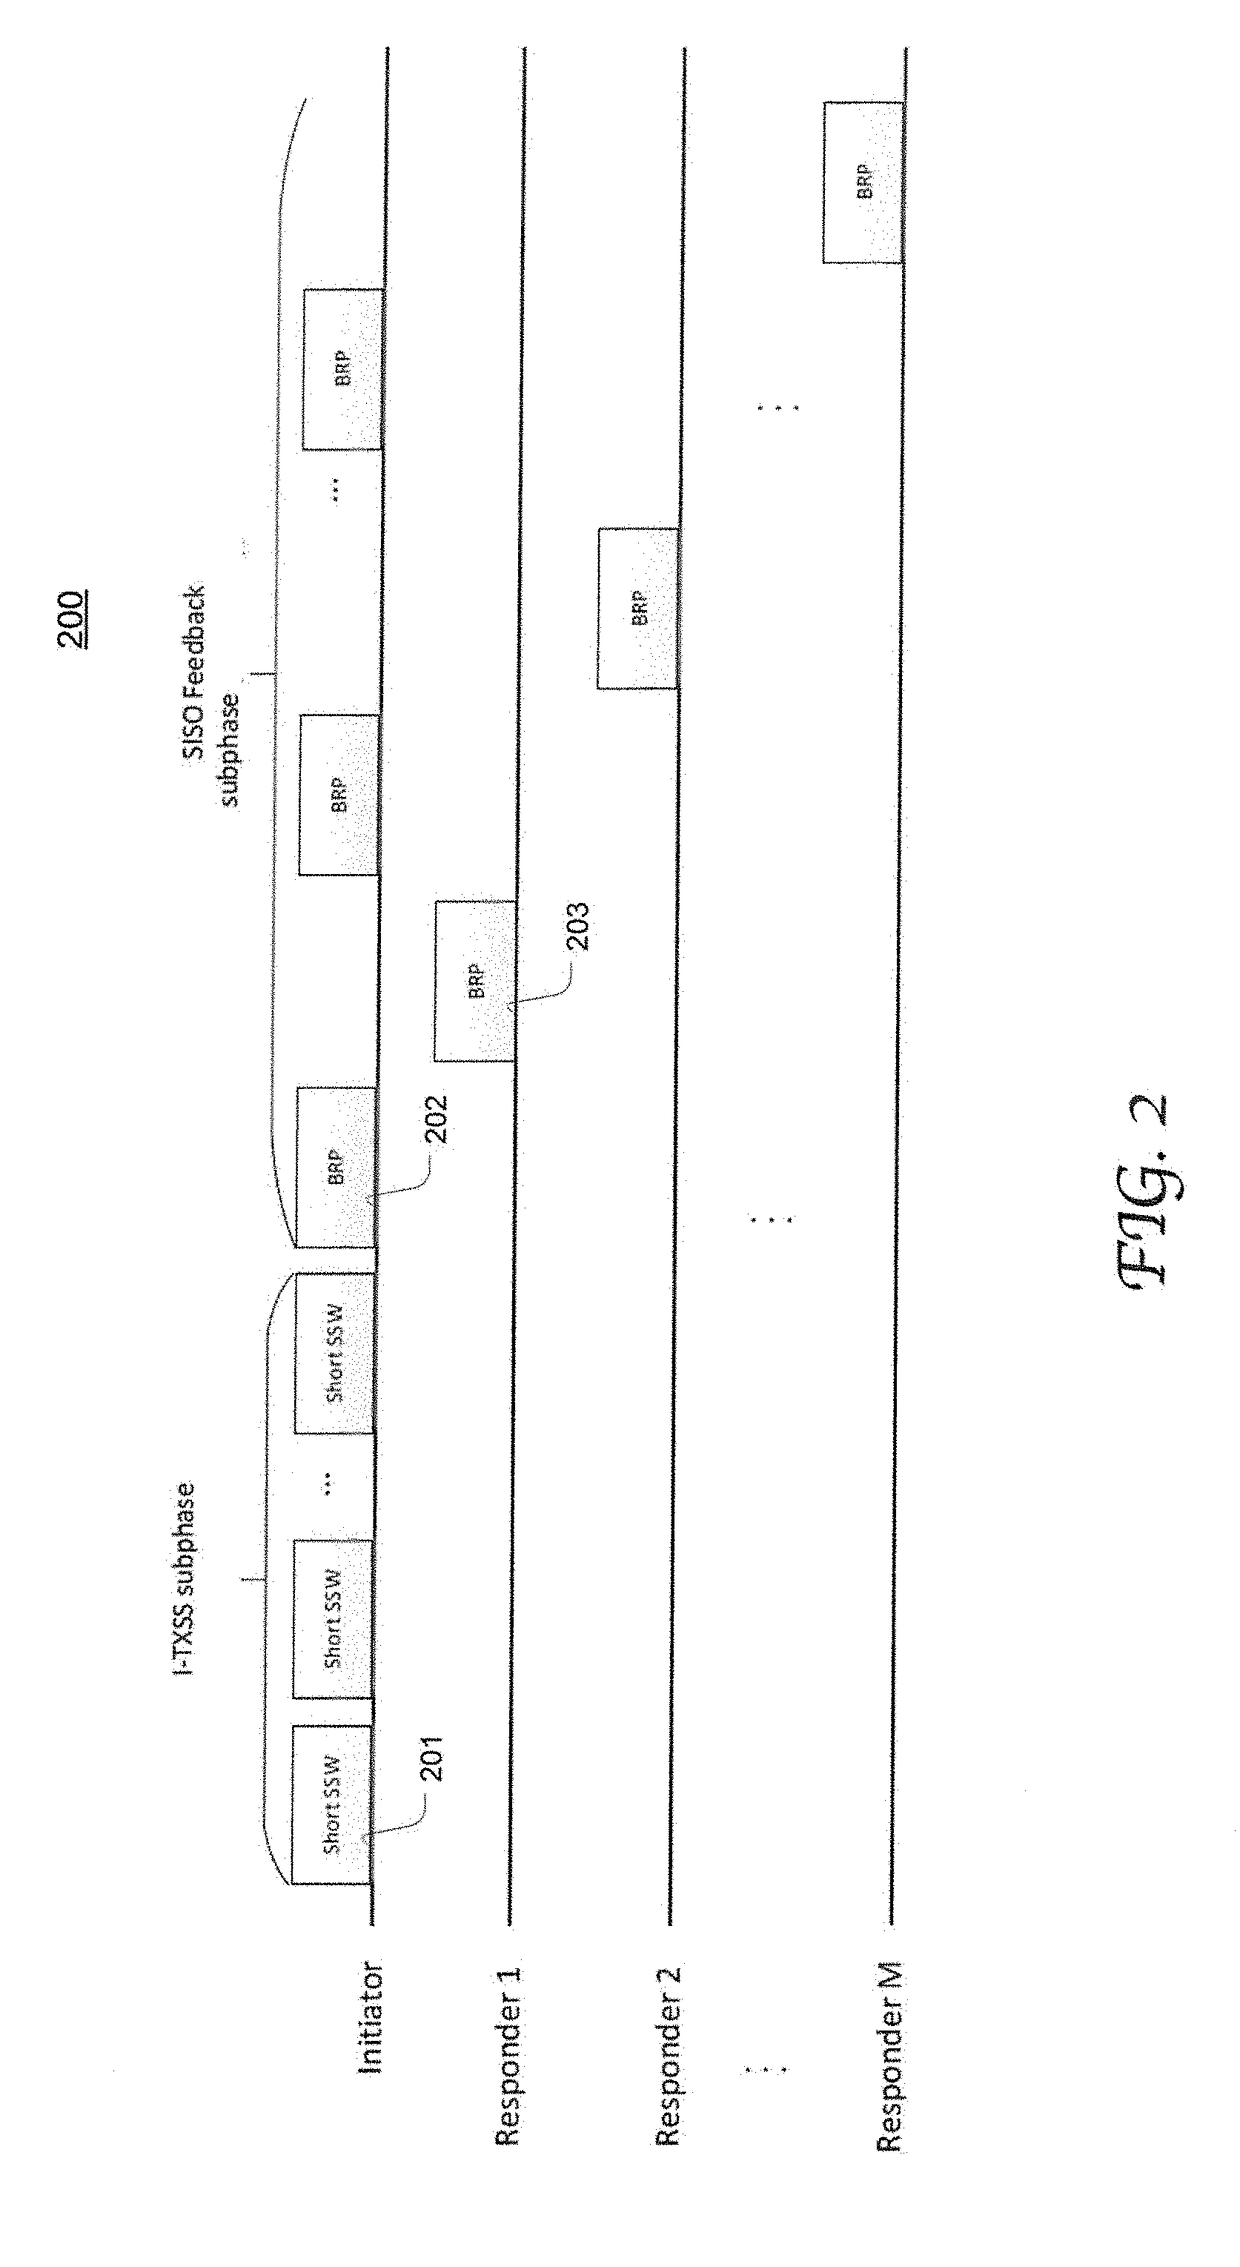 Multi-user multiple-input multiple-output (mu-mimo) operation and user selection